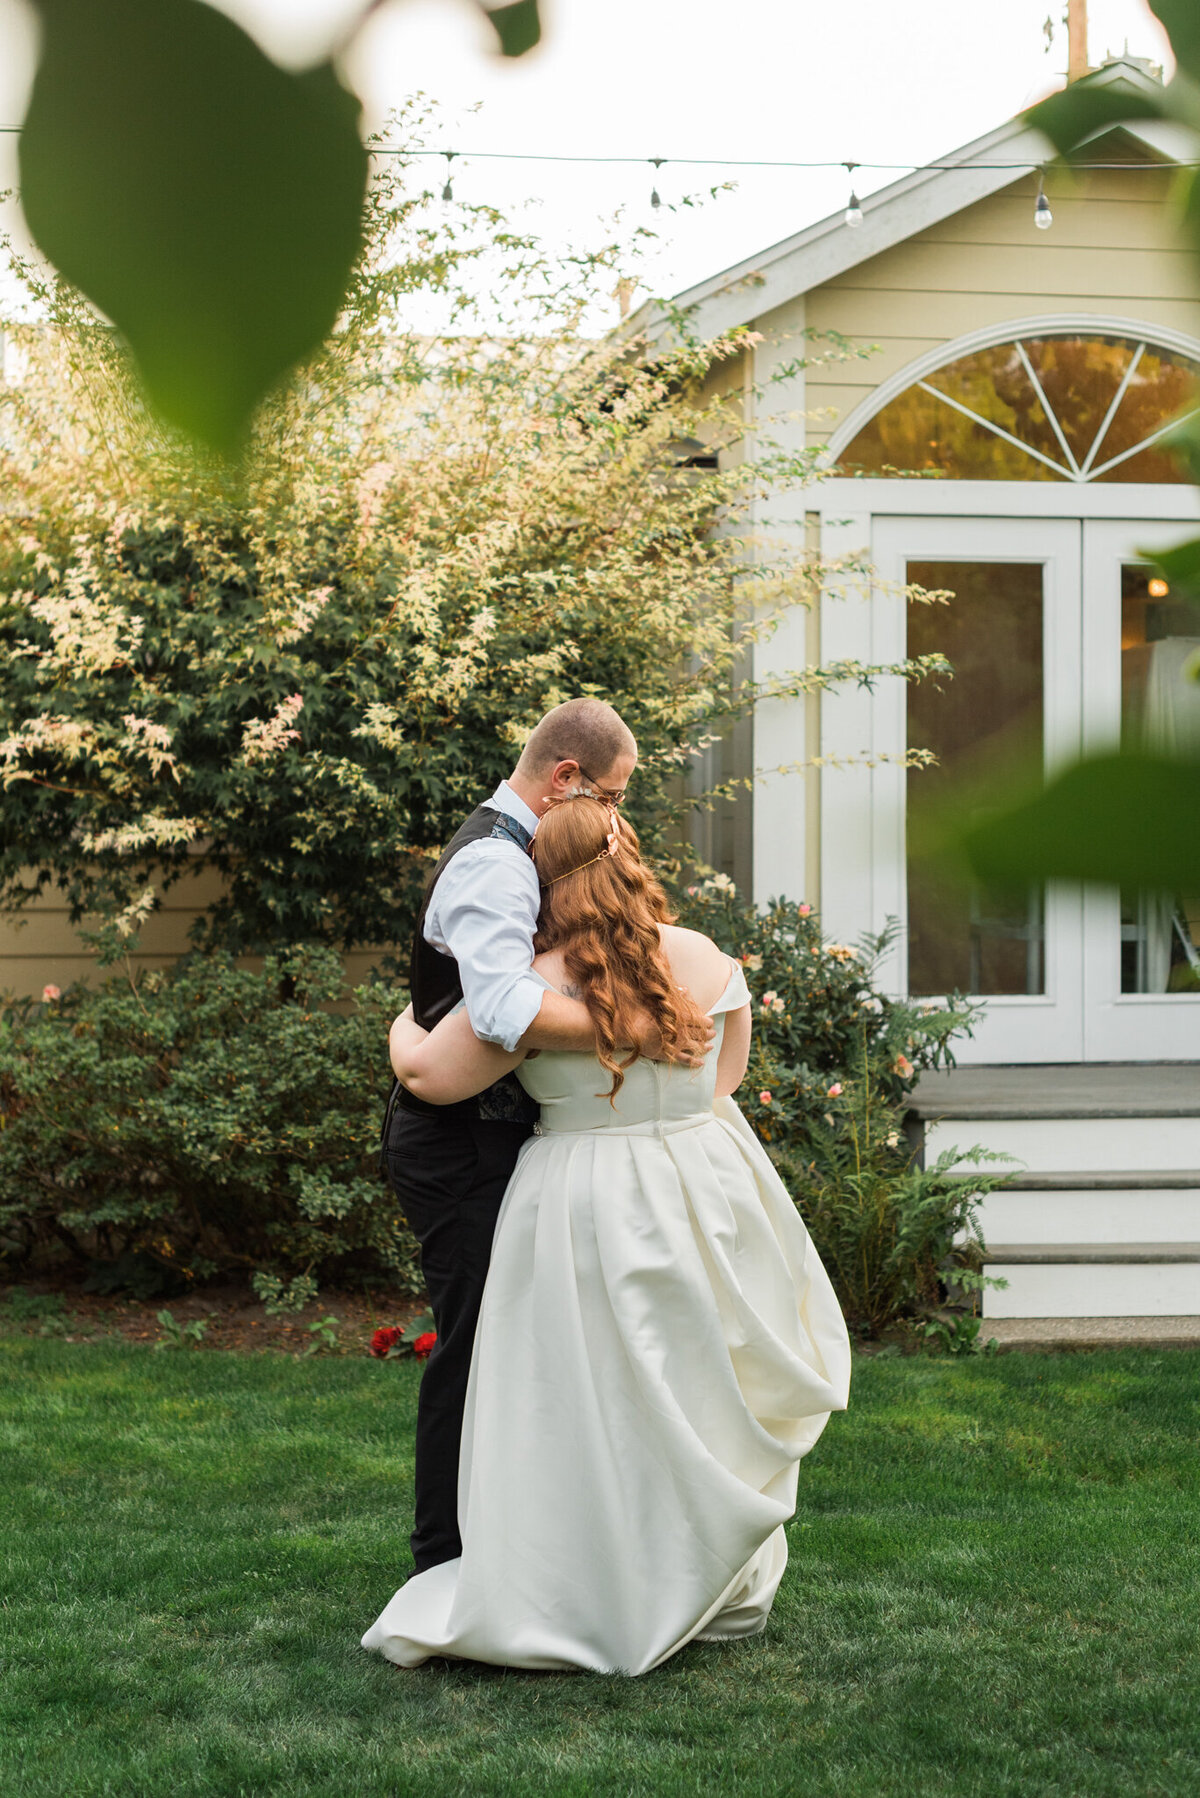 Mount-Vernon-Wedding-Grand-Willow_Caylie-Mash-Photography_481